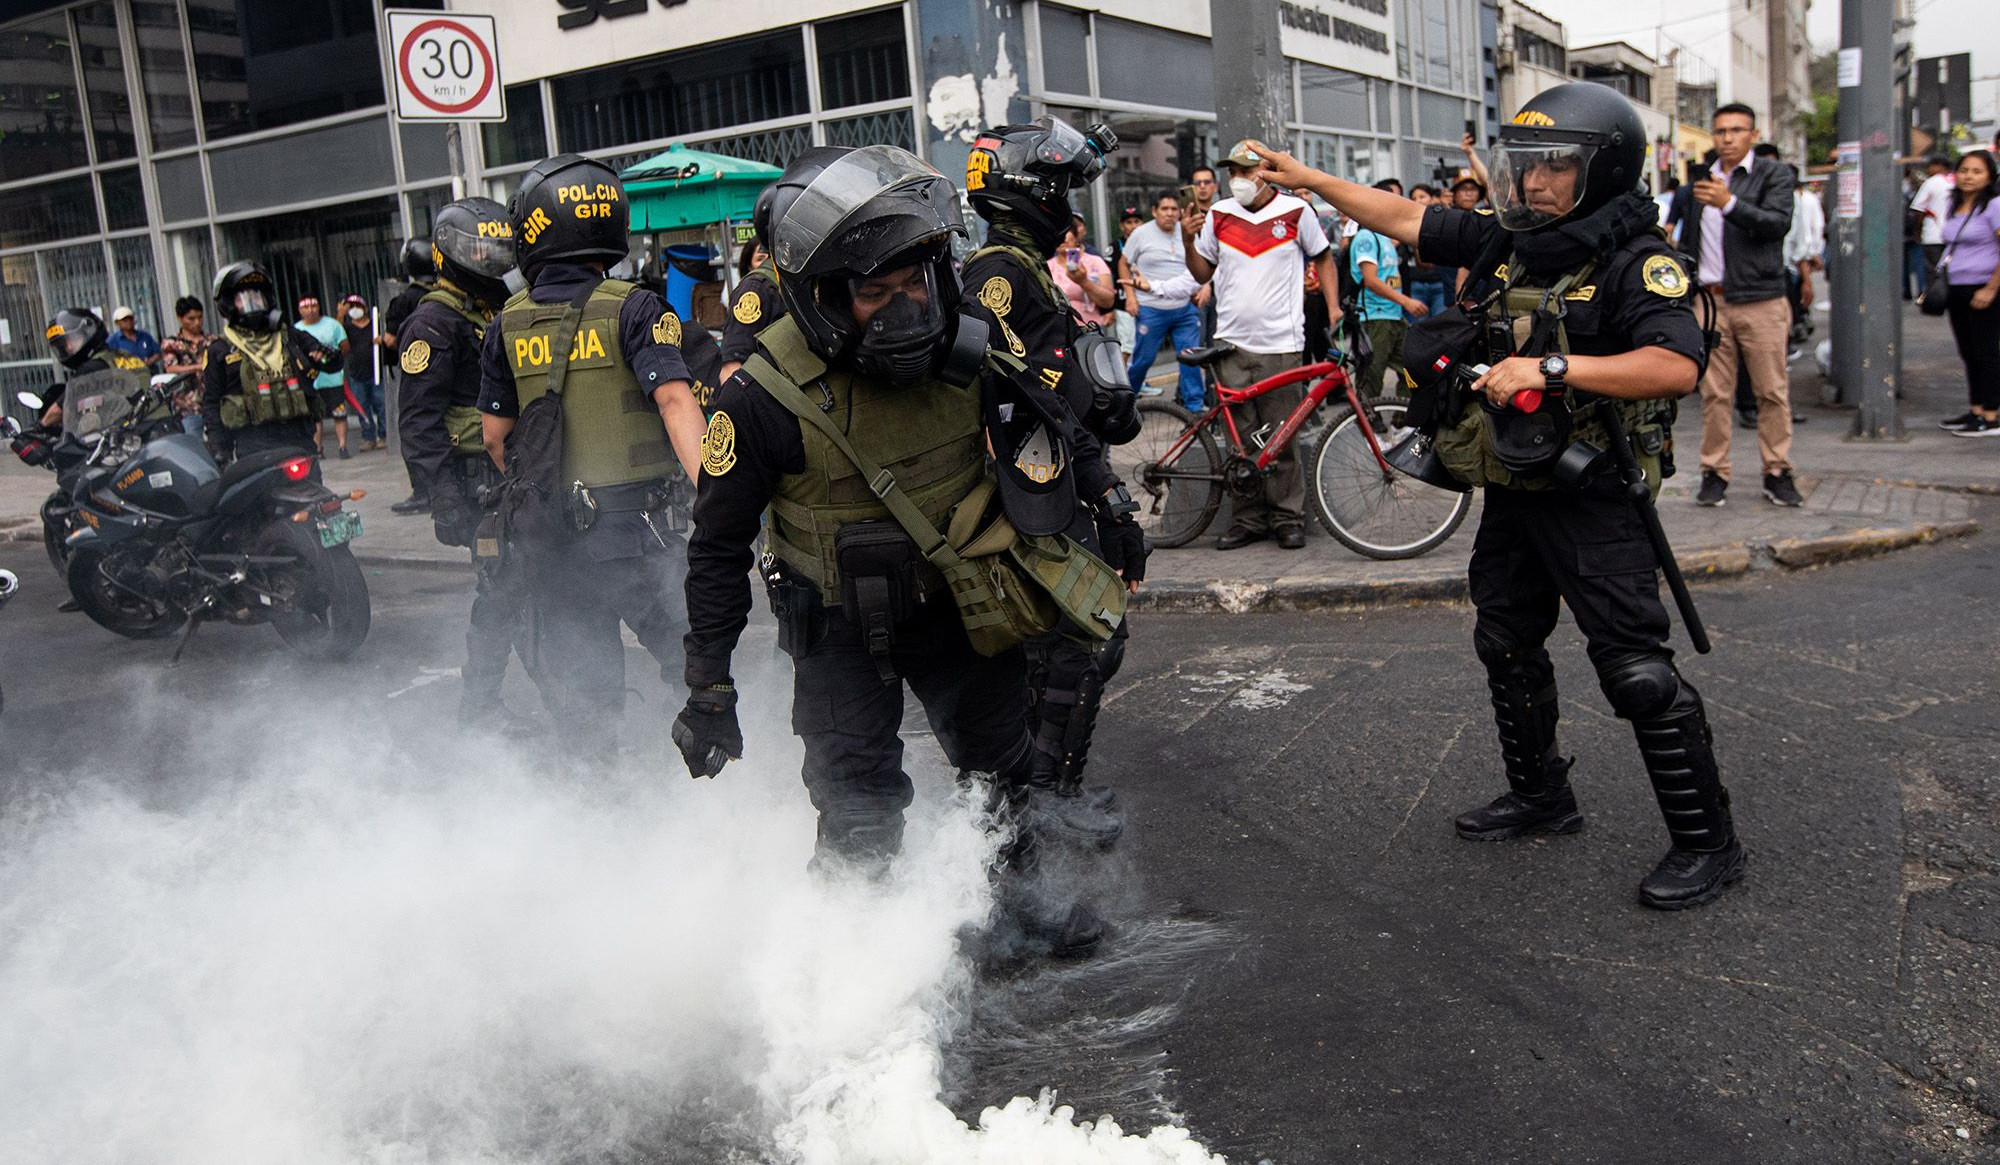 Tension grows between protesters and police in Peru protests